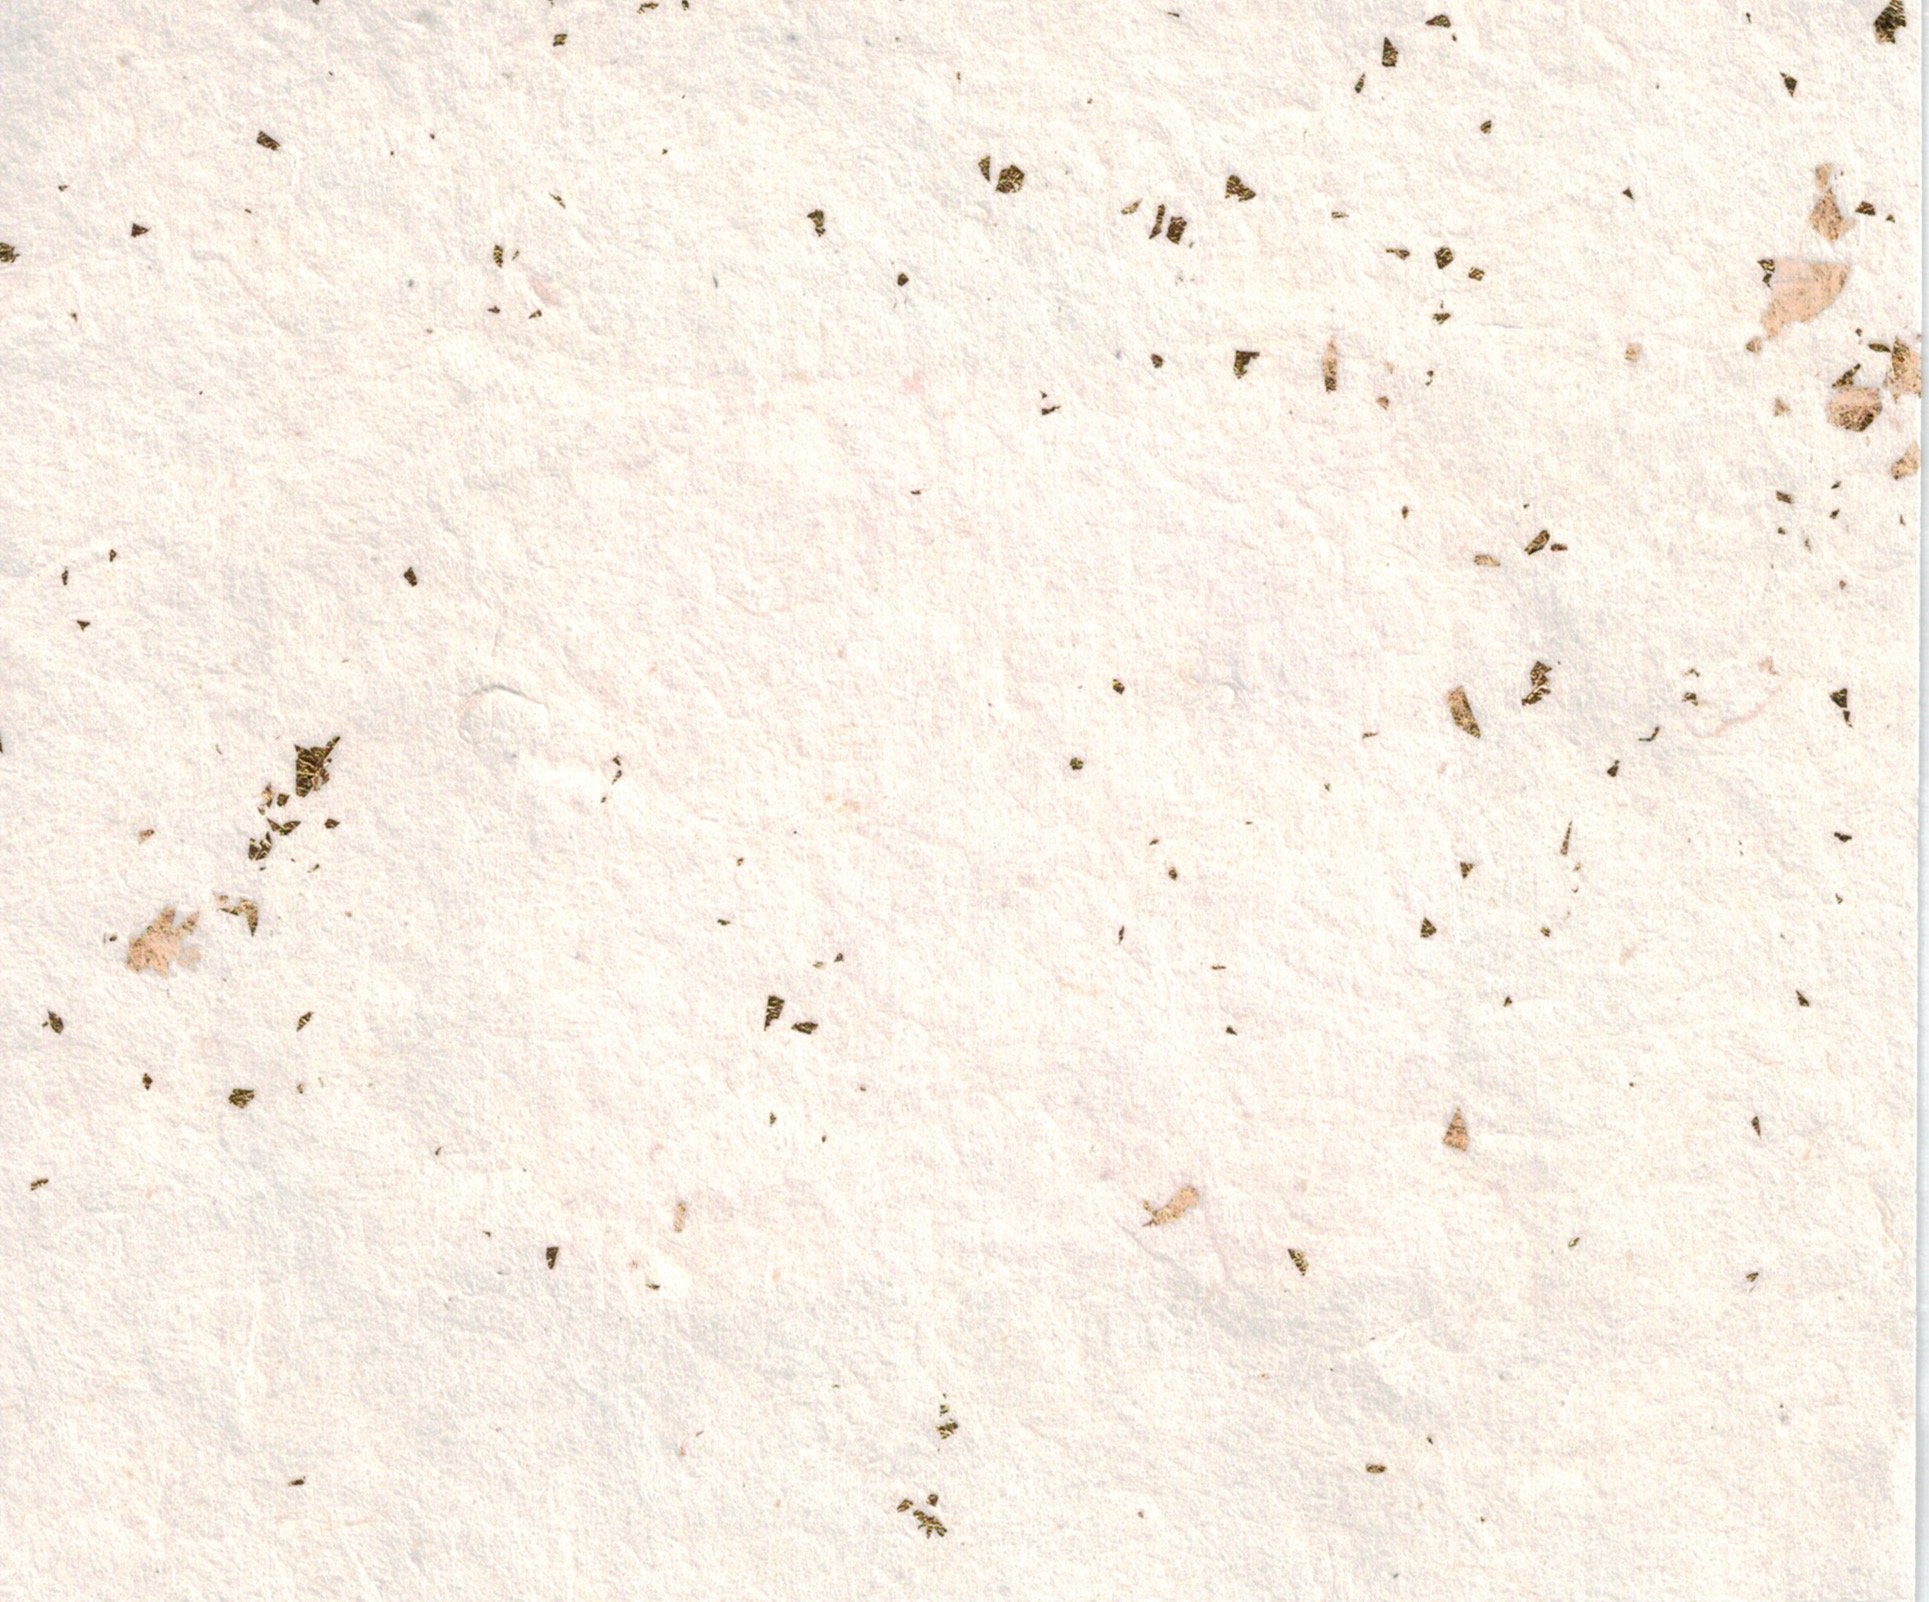 Handmade Paper - Gold Flakes